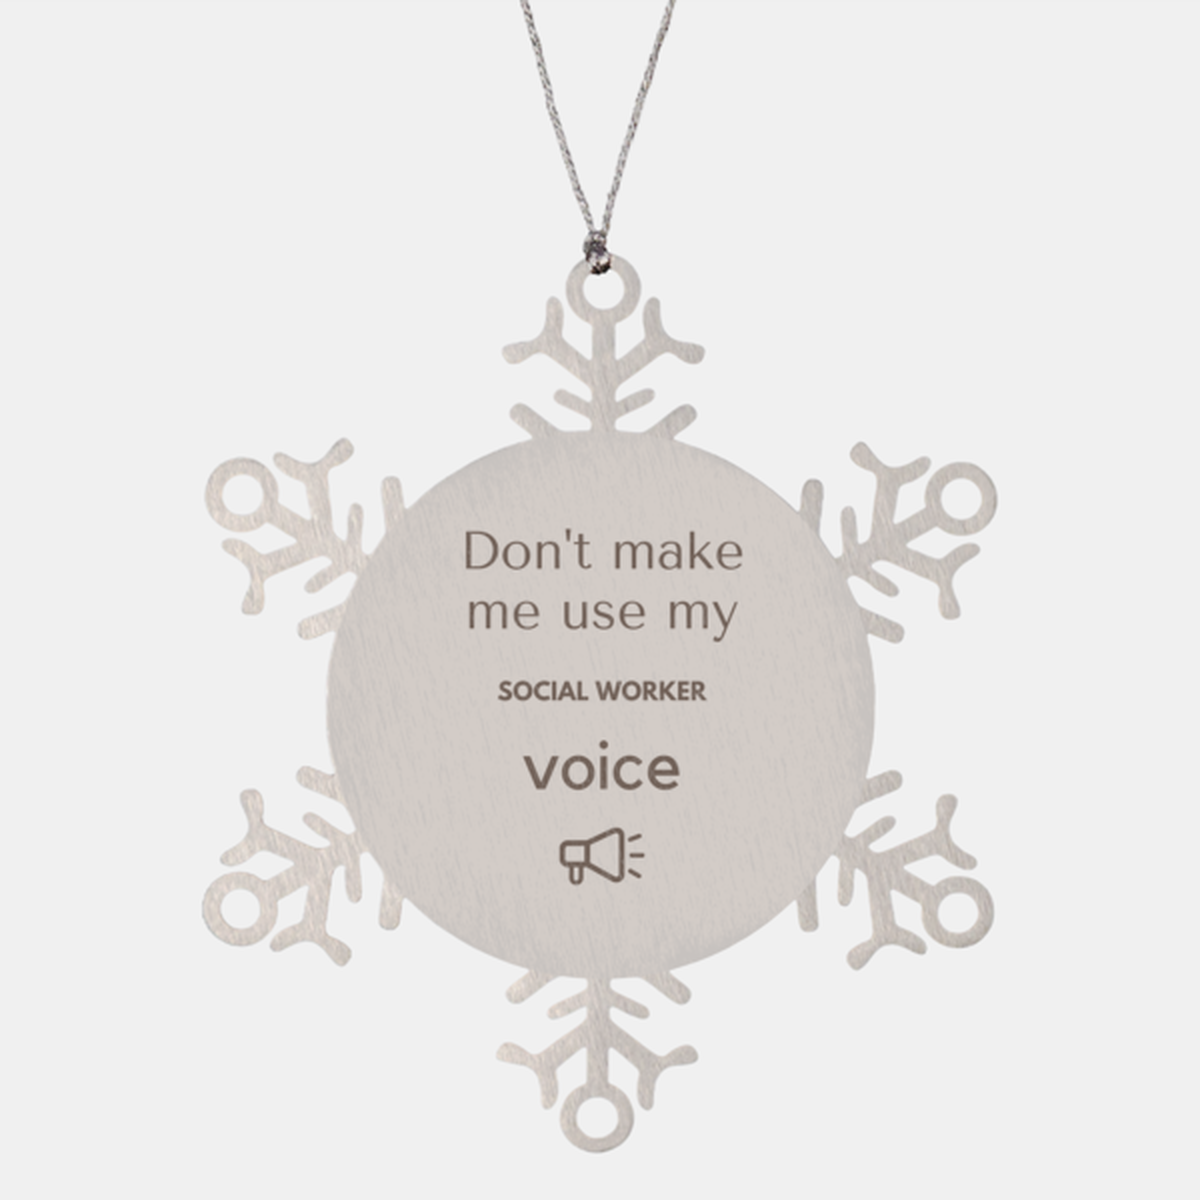 Don't make me use my Social Worker voice, Sarcasm Social Worker Ornament Gifts, Christmas Social Worker Snowflake Ornament Unique Gifts For Social Worker Coworkers, Men, Women, Colleague, Friends